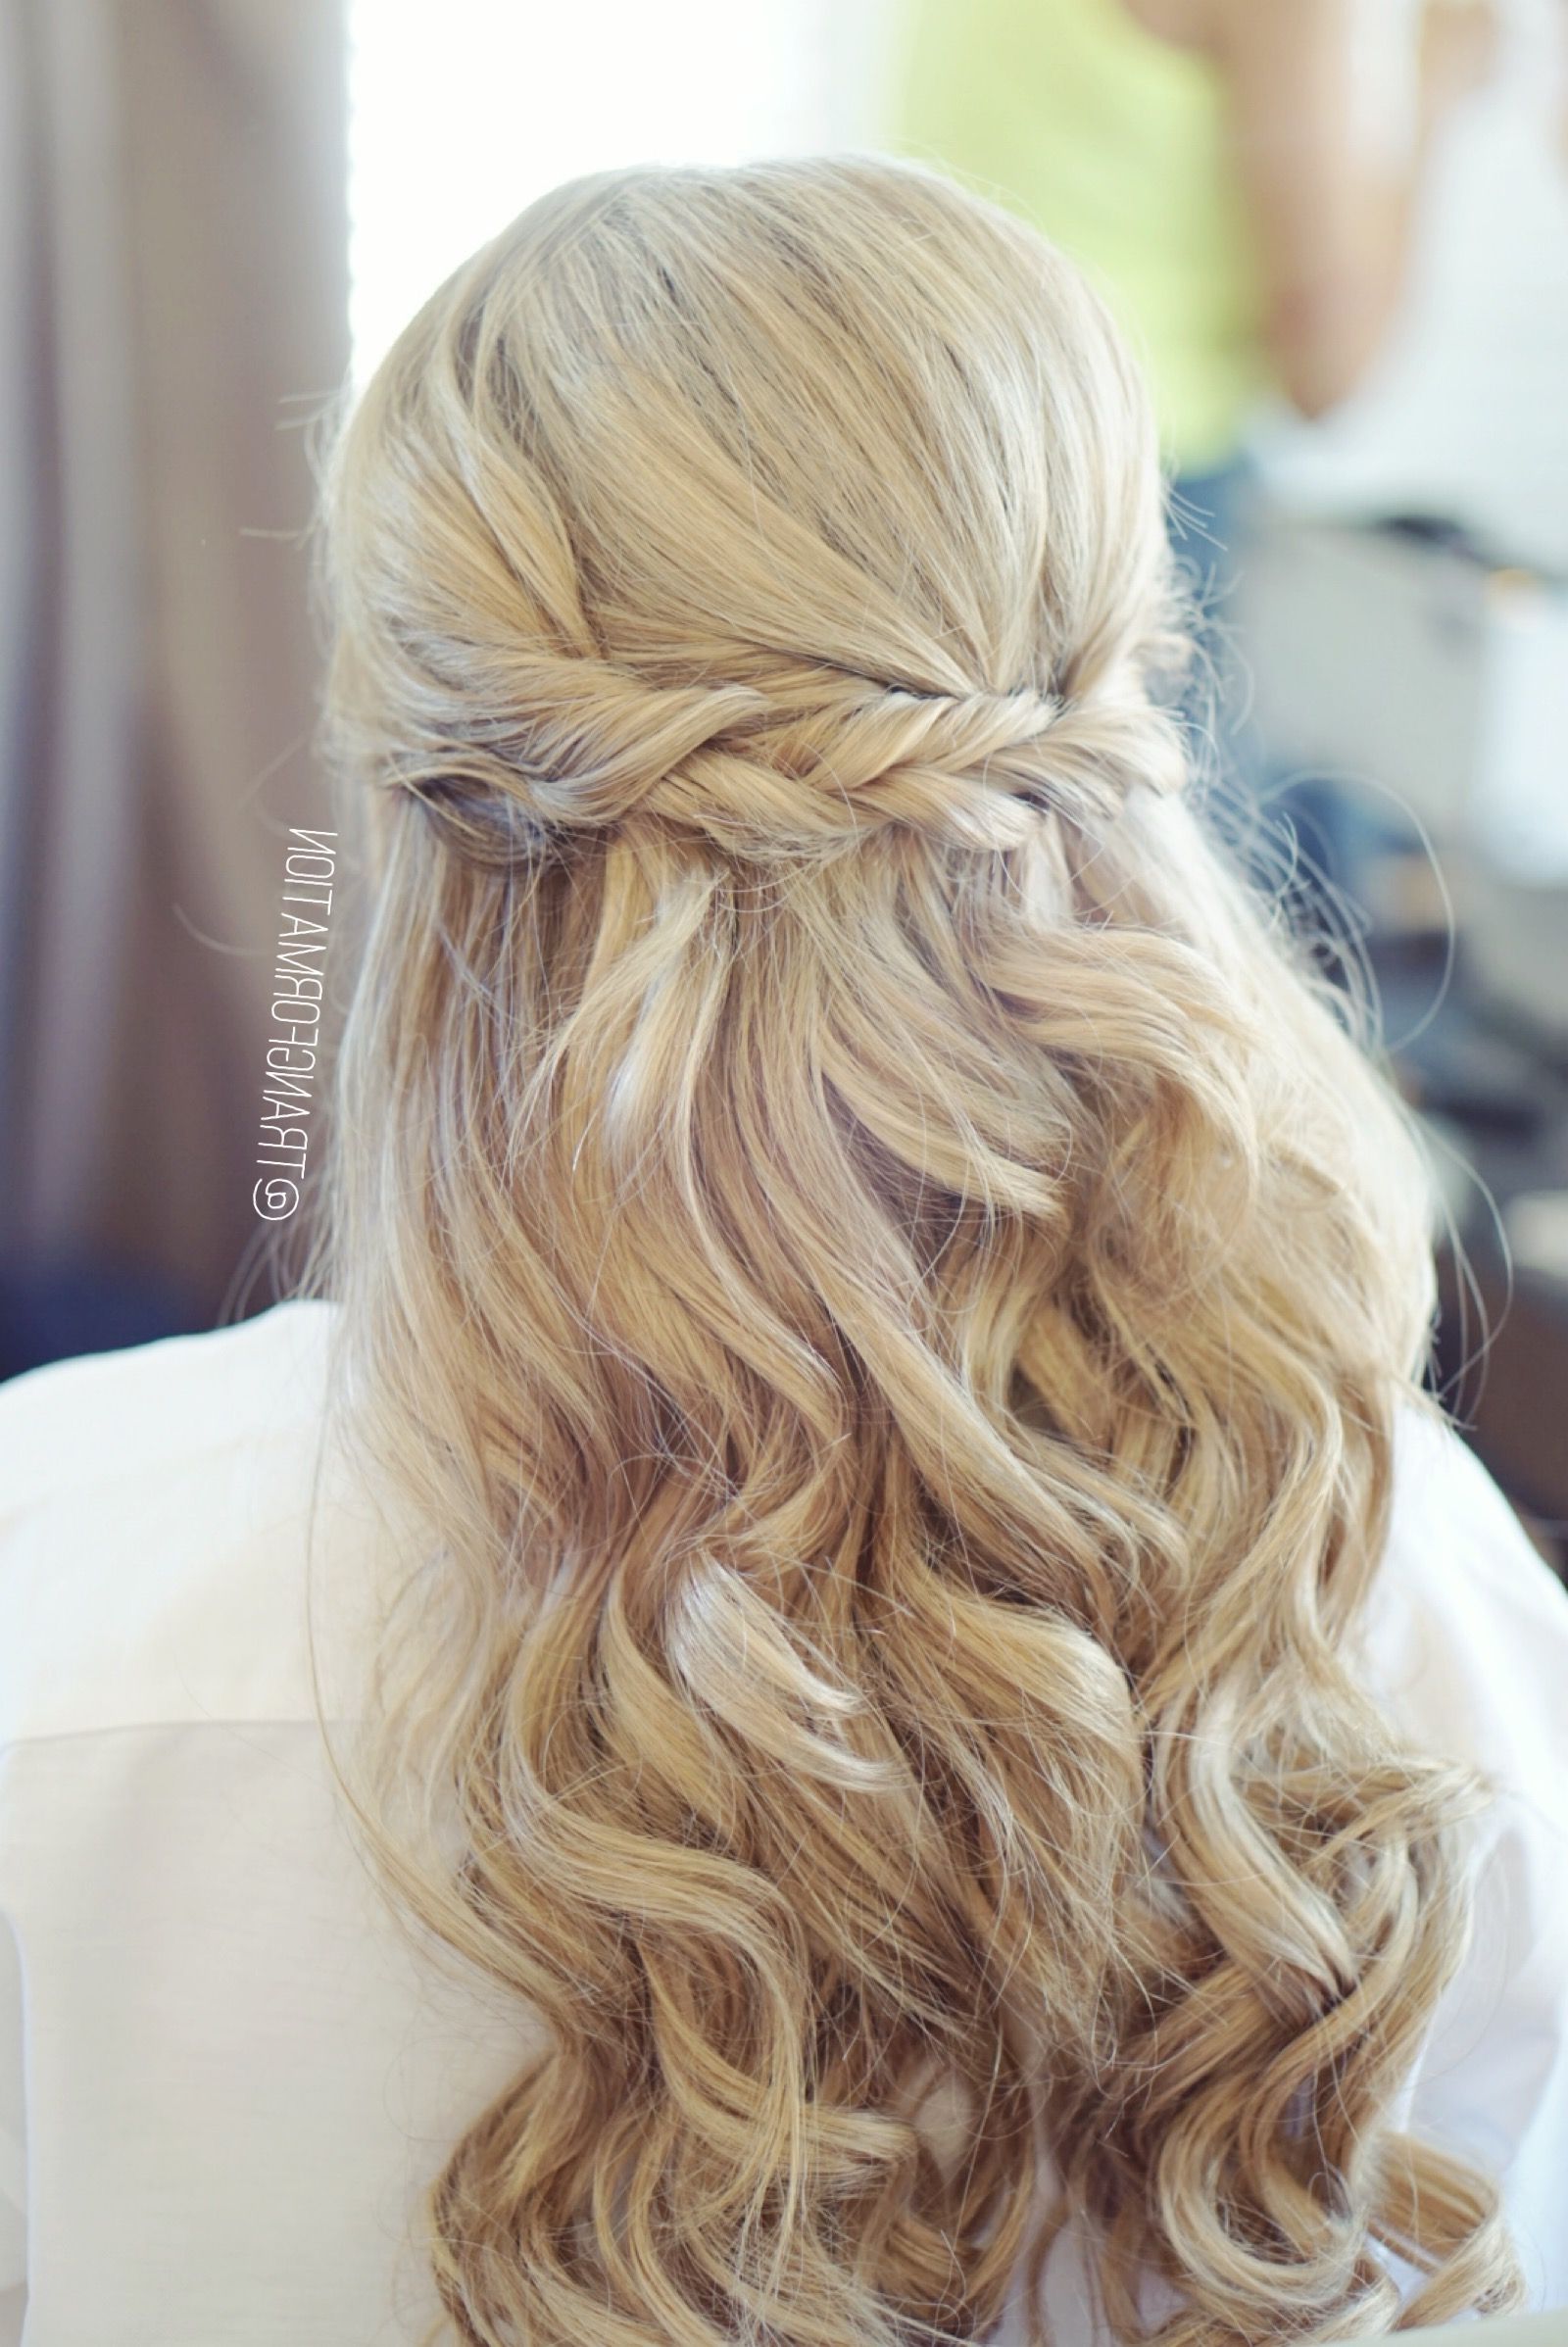 Half Up Half Down, Bridal Hair, Wedding Hair, Bride, Wedding Pertaining To Well Liked Wedding Hairstyles For Long Hair Half Up And Half Down (View 10 of 15)